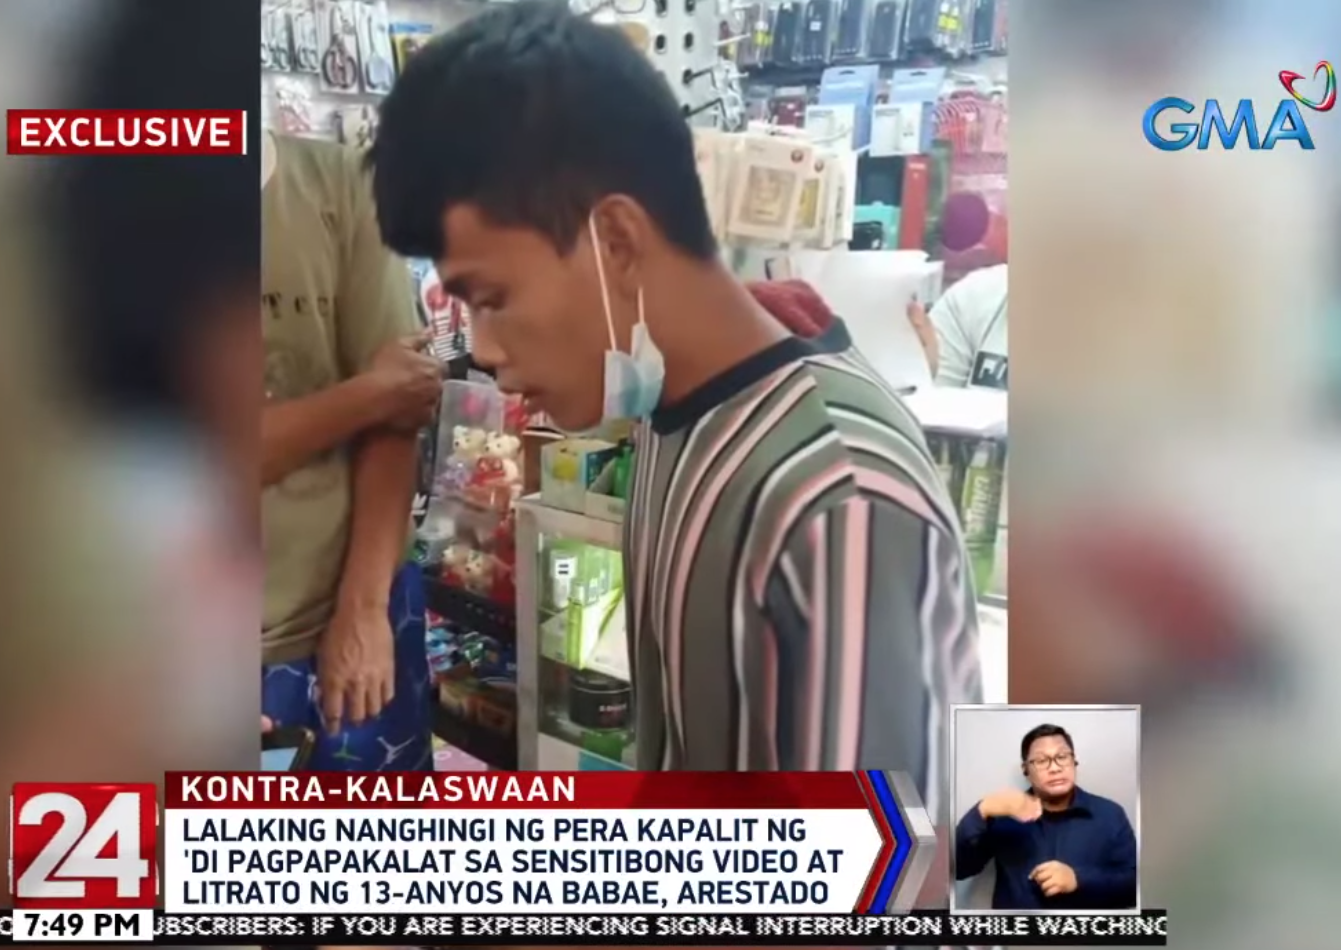 22-year-old nabbed for blackmailing 13-year-old with lewd video | GMA News Online